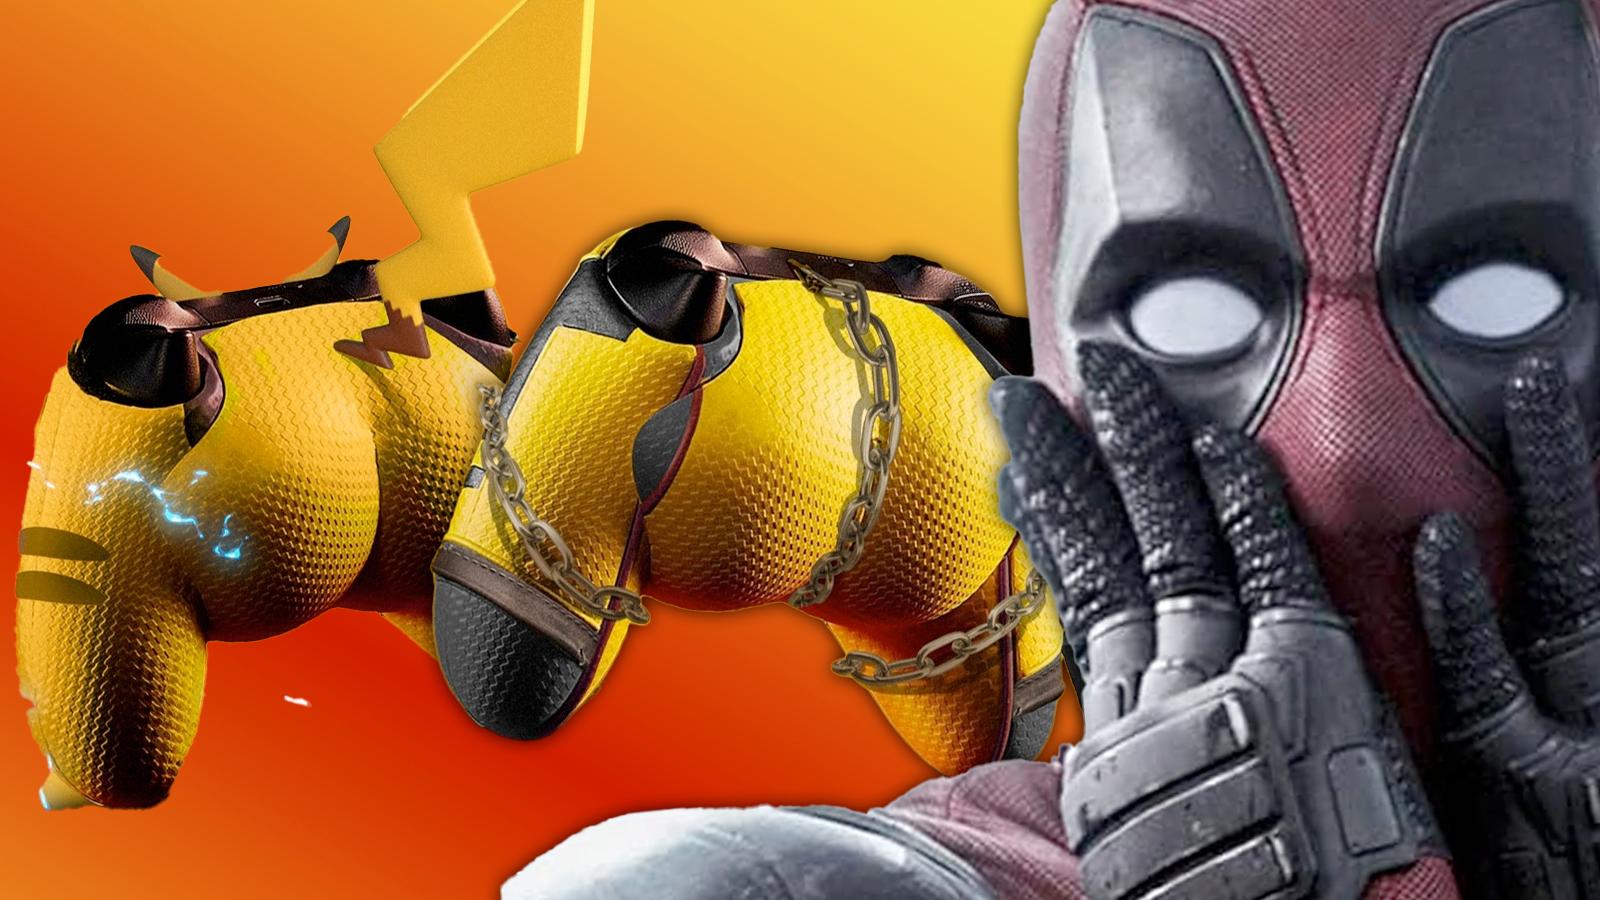 deadpool super imposed pulling a shocked face at the scorpion & pikachu rendered controller